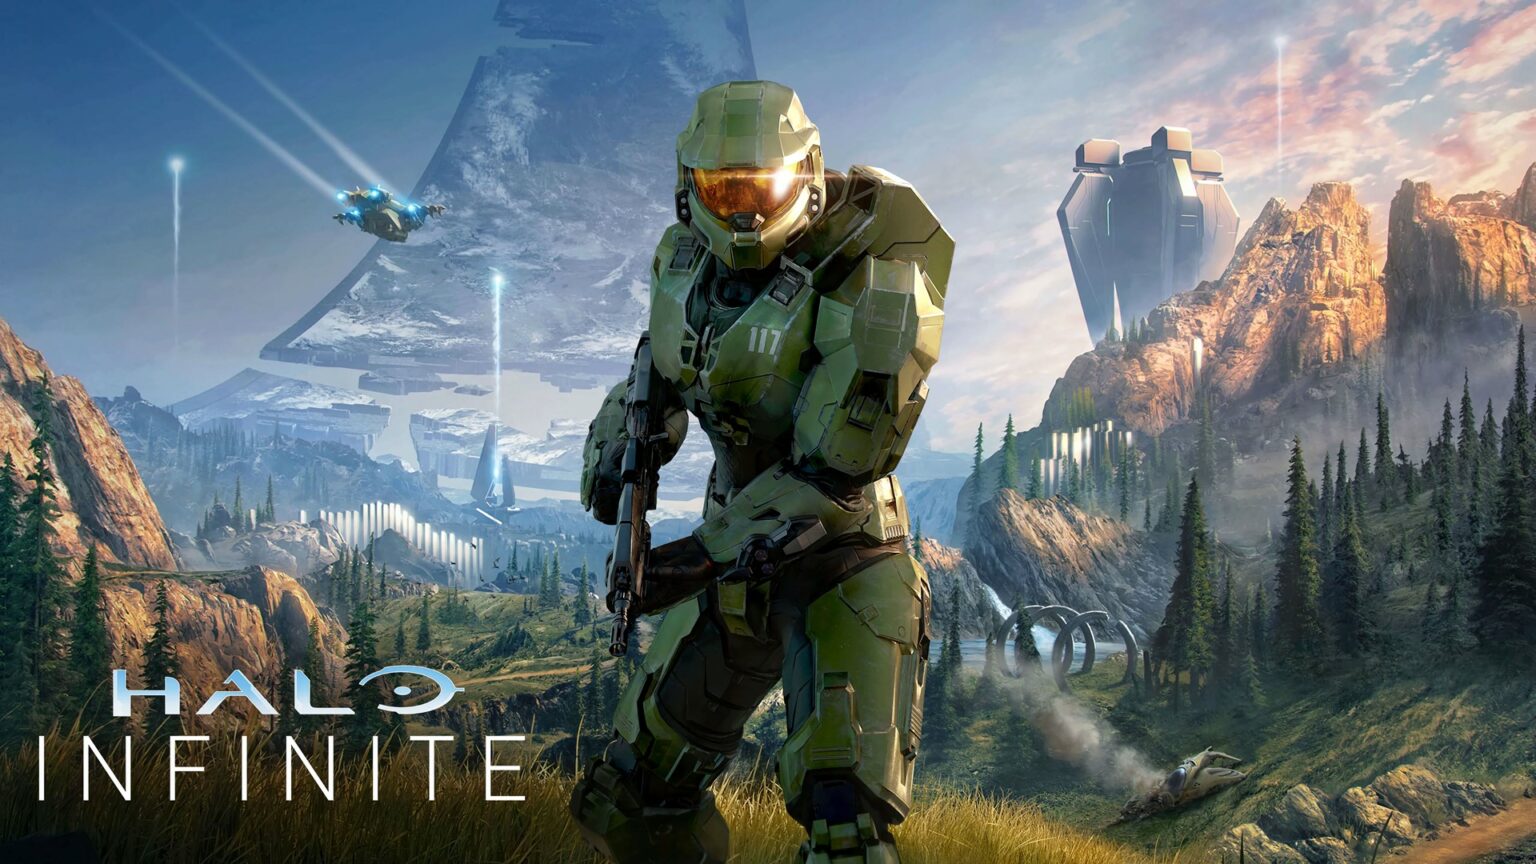 Want to Beta Test the New Halo Infinite Game? – Here’s How! cover